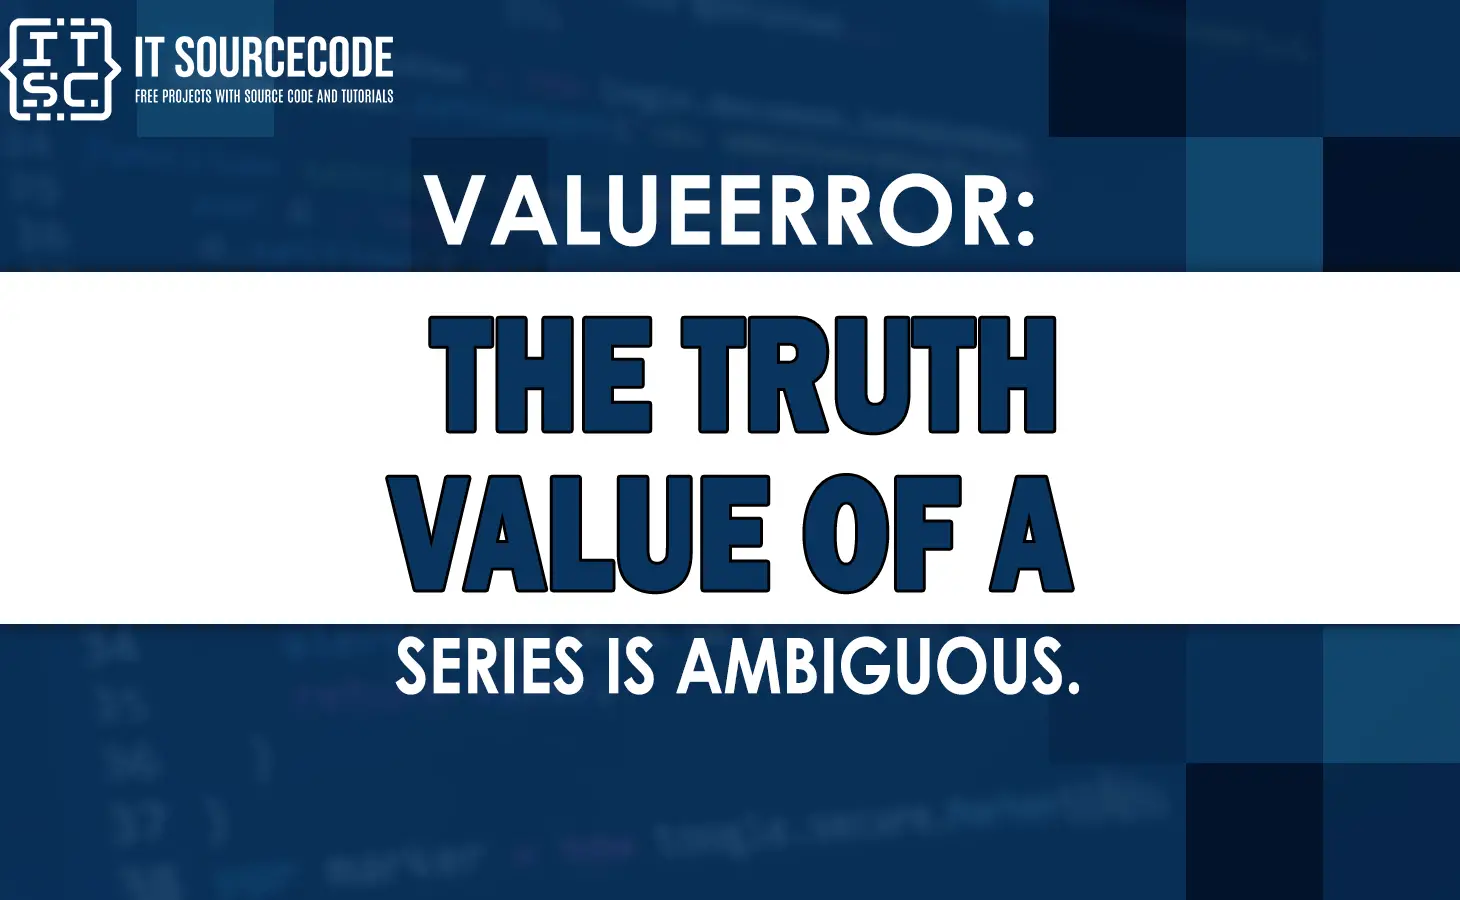 Valueerror the truth value of a series is ambiguous.